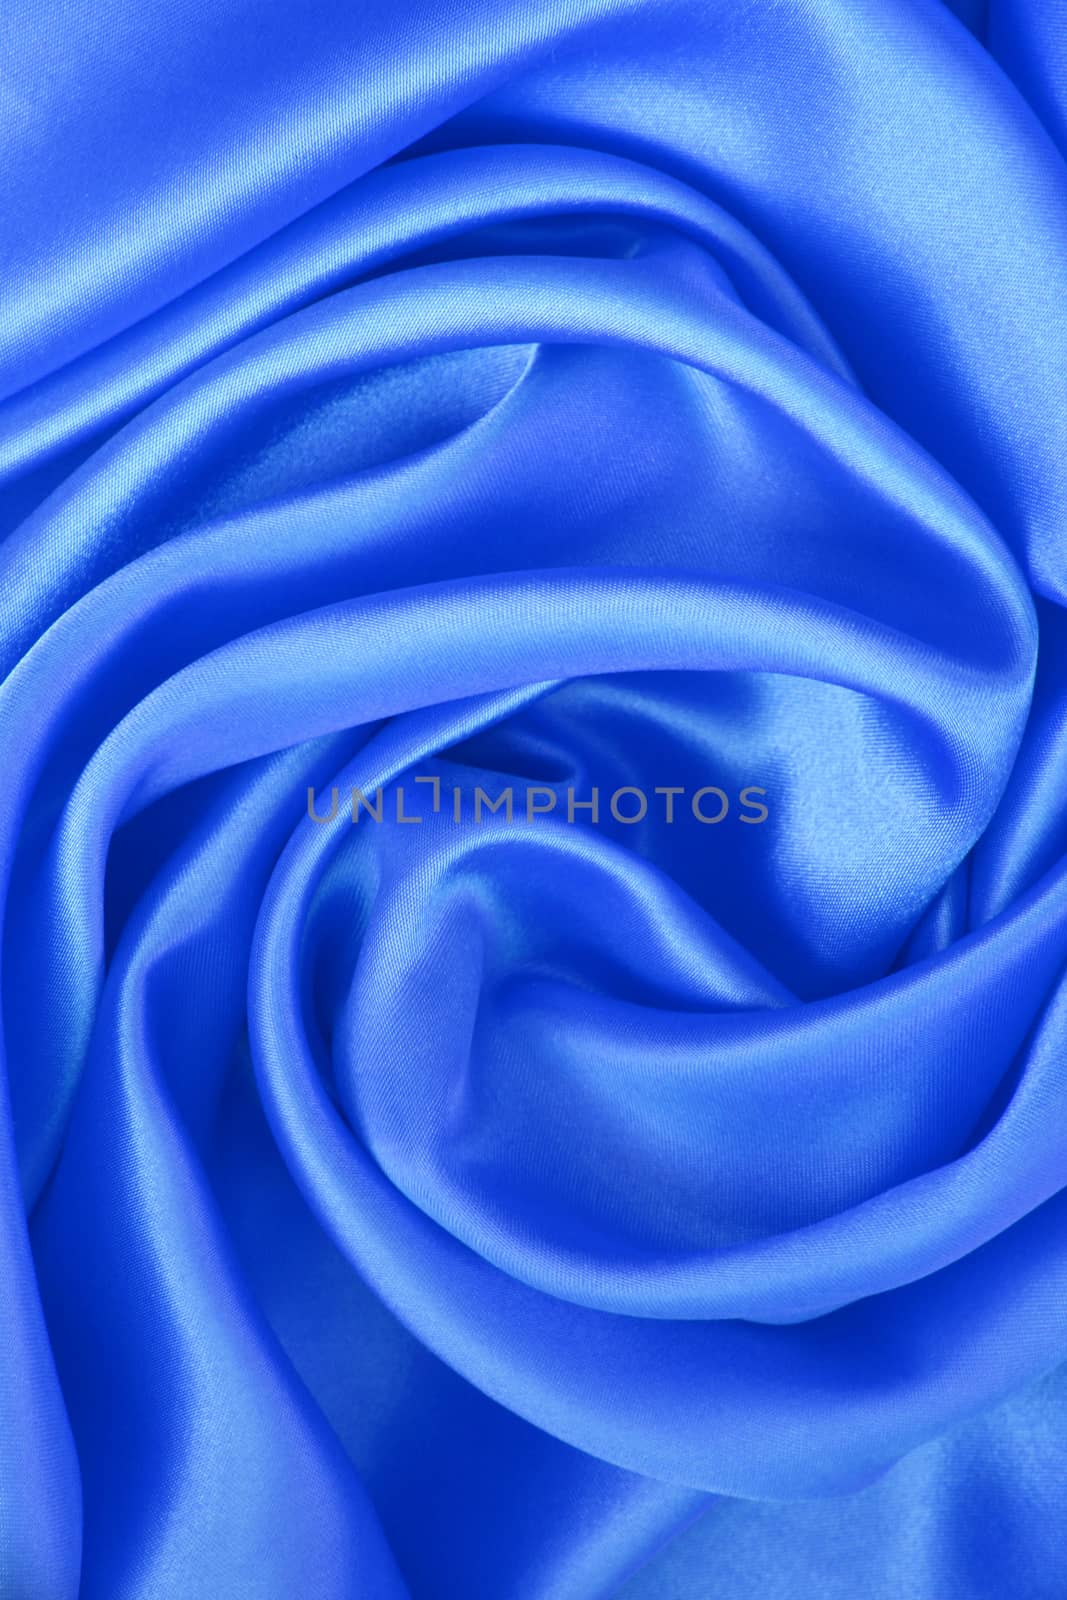 Smooth elegant blue silk can use as background 